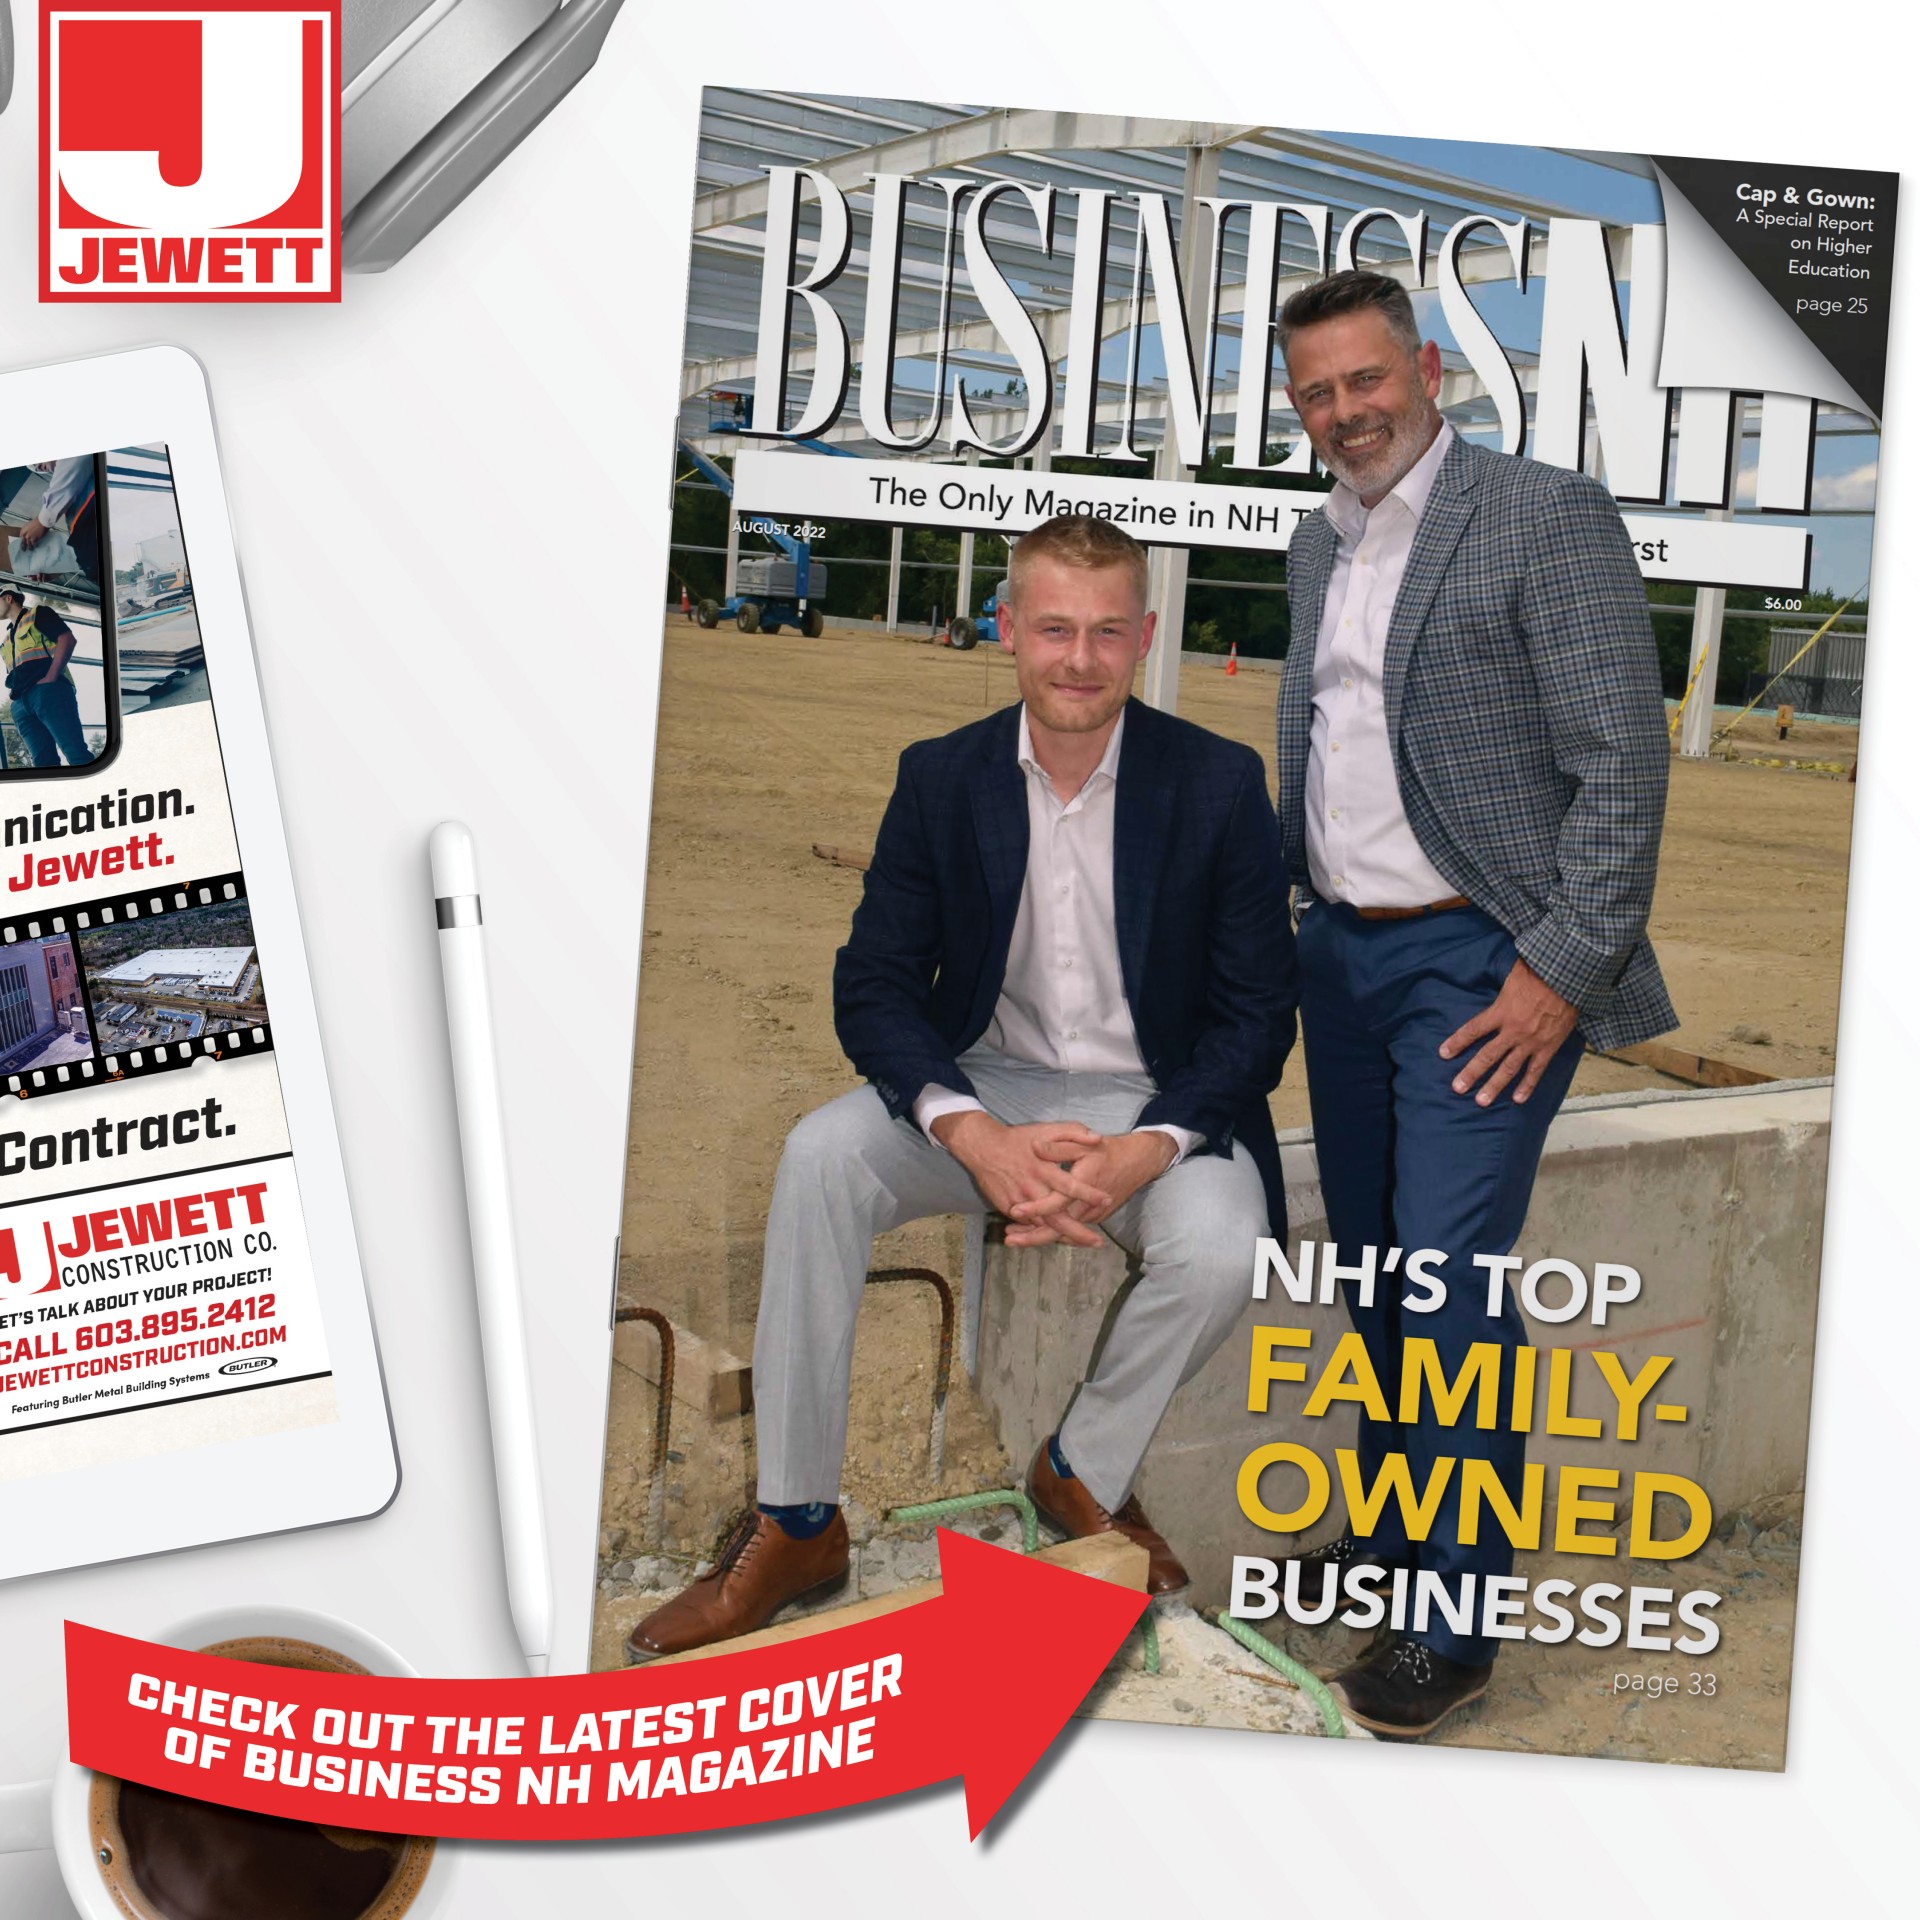 Jewett Lands the Cover of Business NH's Top Family Owned Businesses Issue